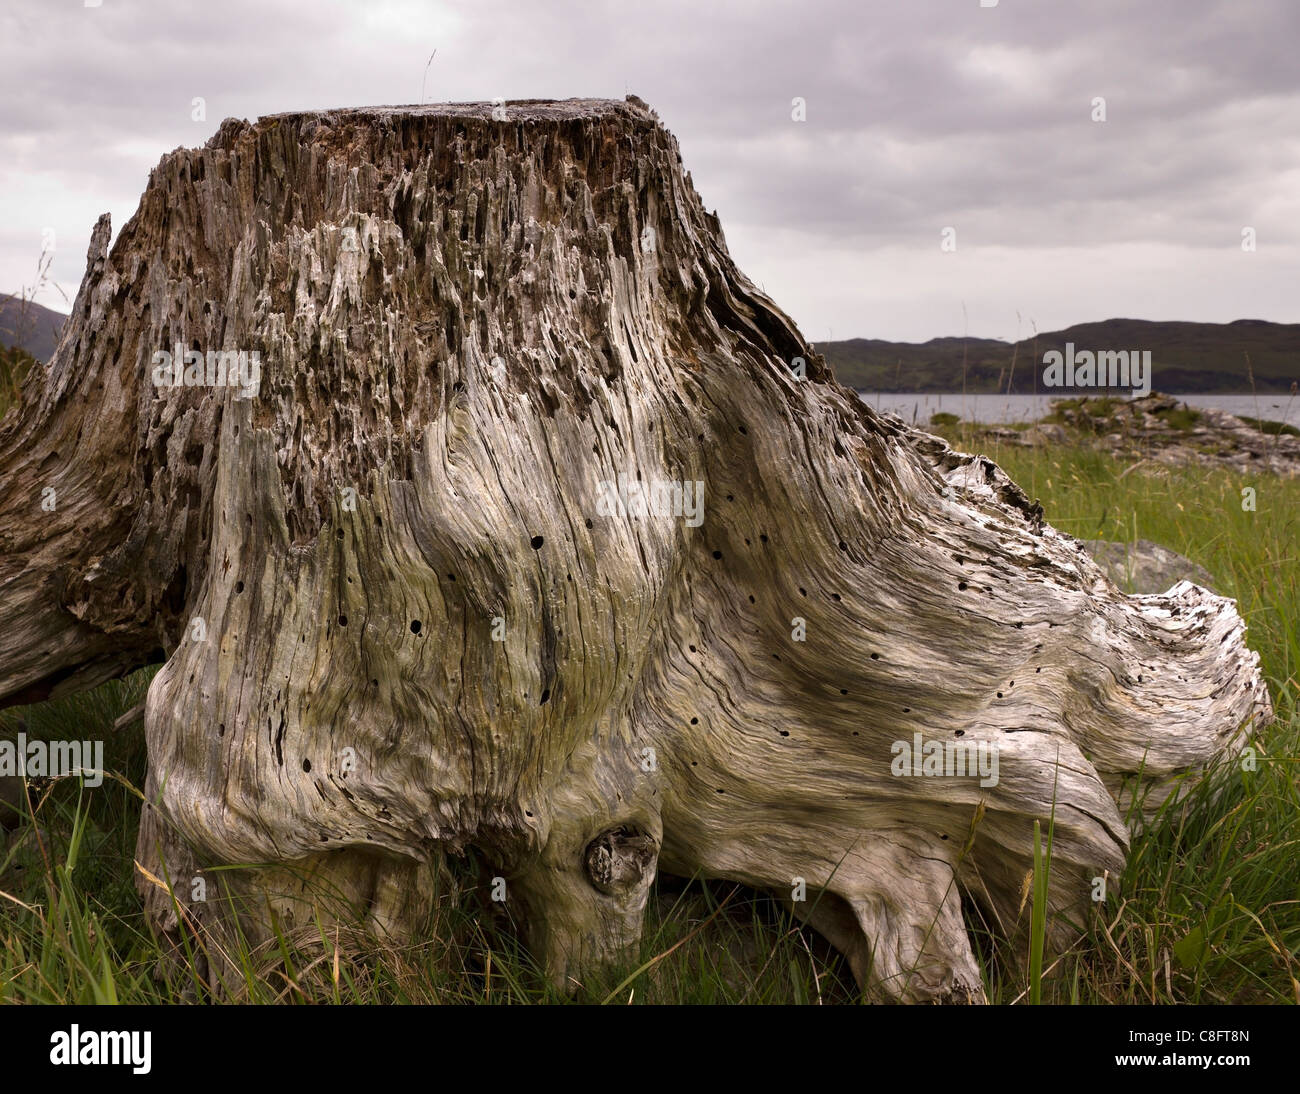 Eroded, decayed dead driftwood tree stump on the shores of Loch Slapin, Isle of Skye, Scotland, UK Stock Photo